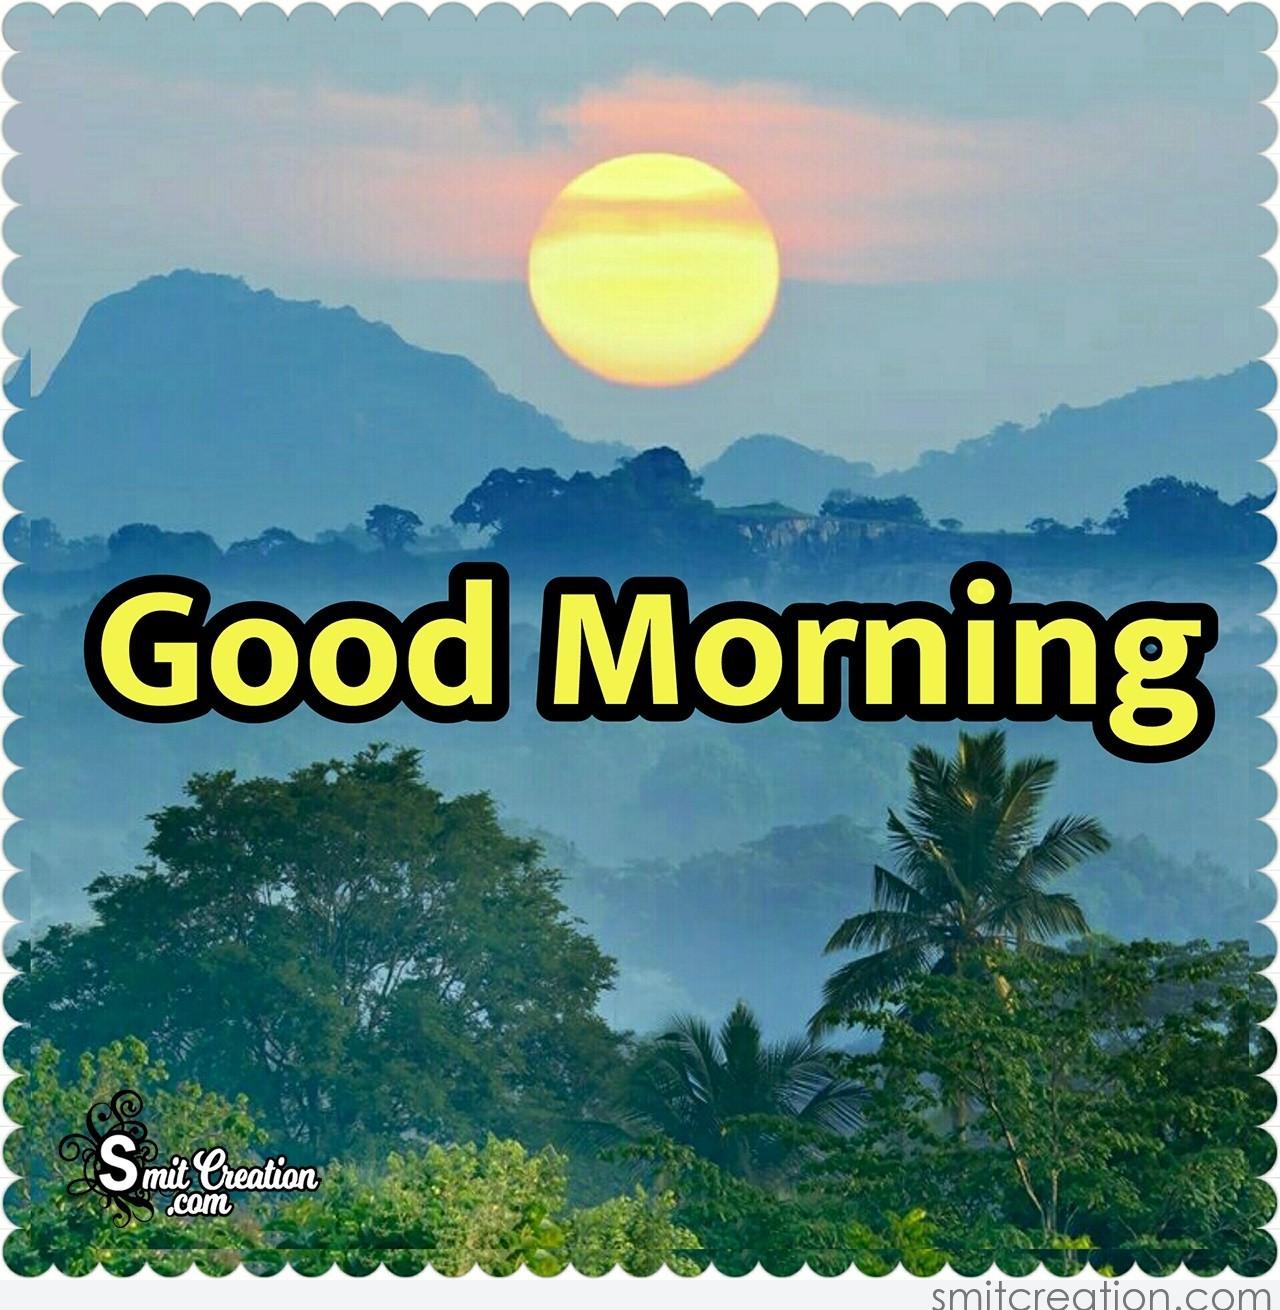 Good Morning Pictures And Graphics Smitcreation Com